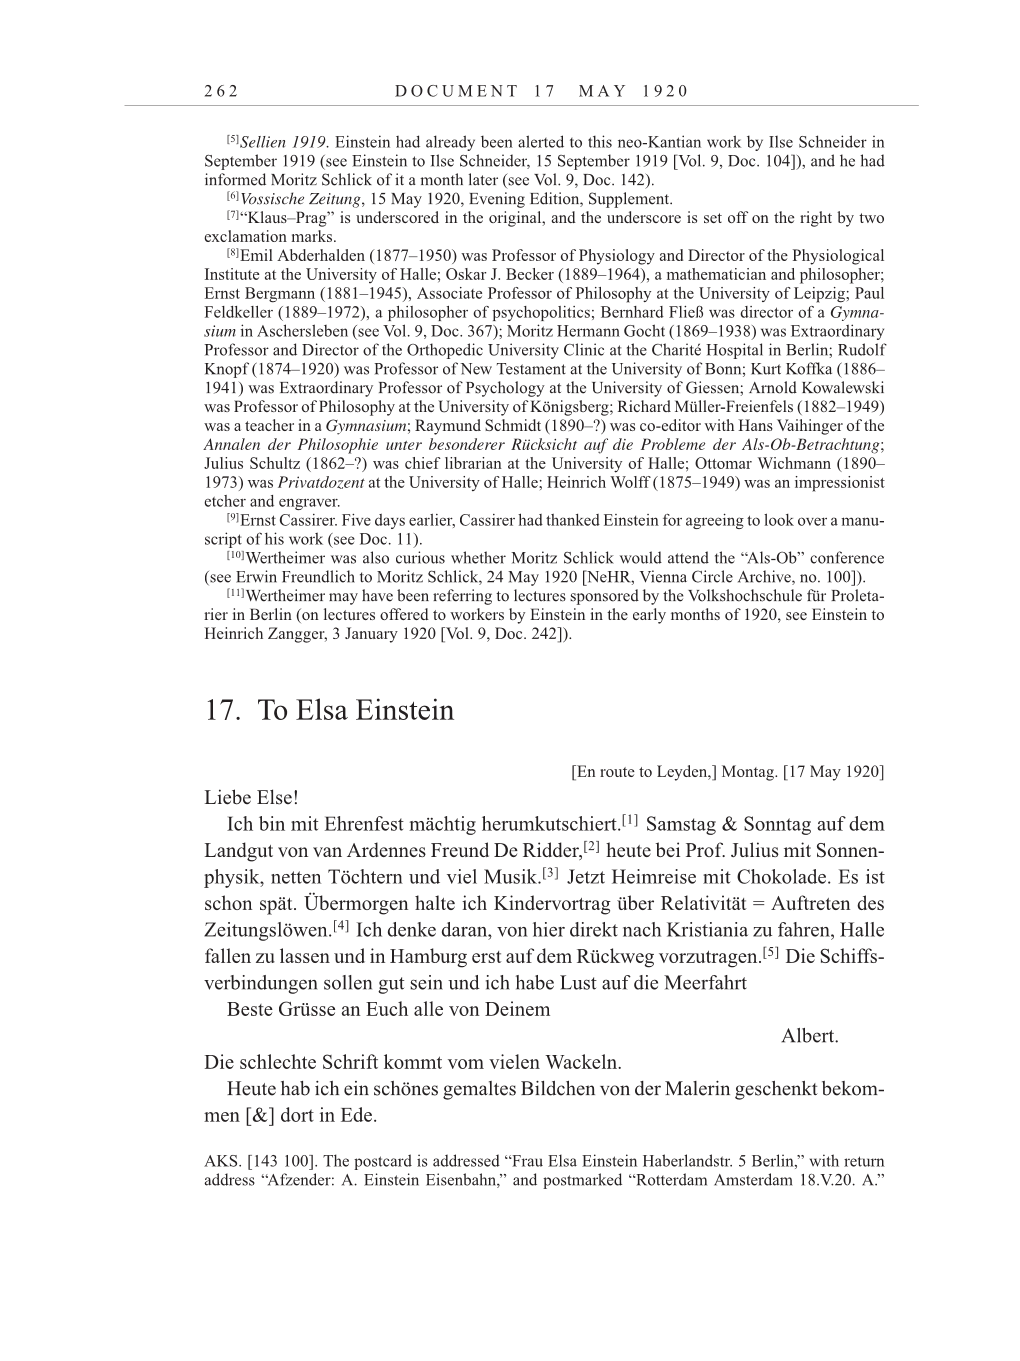 Volume 10: The Berlin Years: Correspondence May-December 1920 / Supplementary Correspondence 1909-1920 page 262